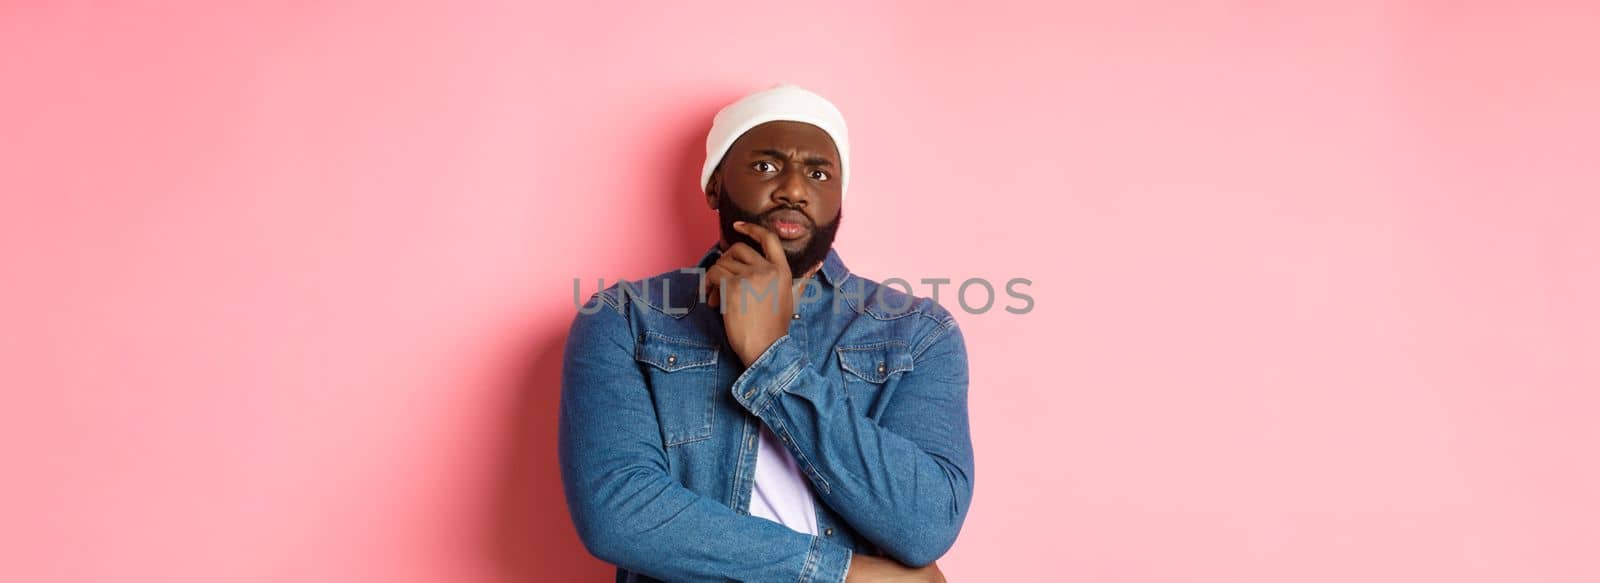 Doubtful african american man staring at camera with disbelief, standing skeptical and thinking, pink background.